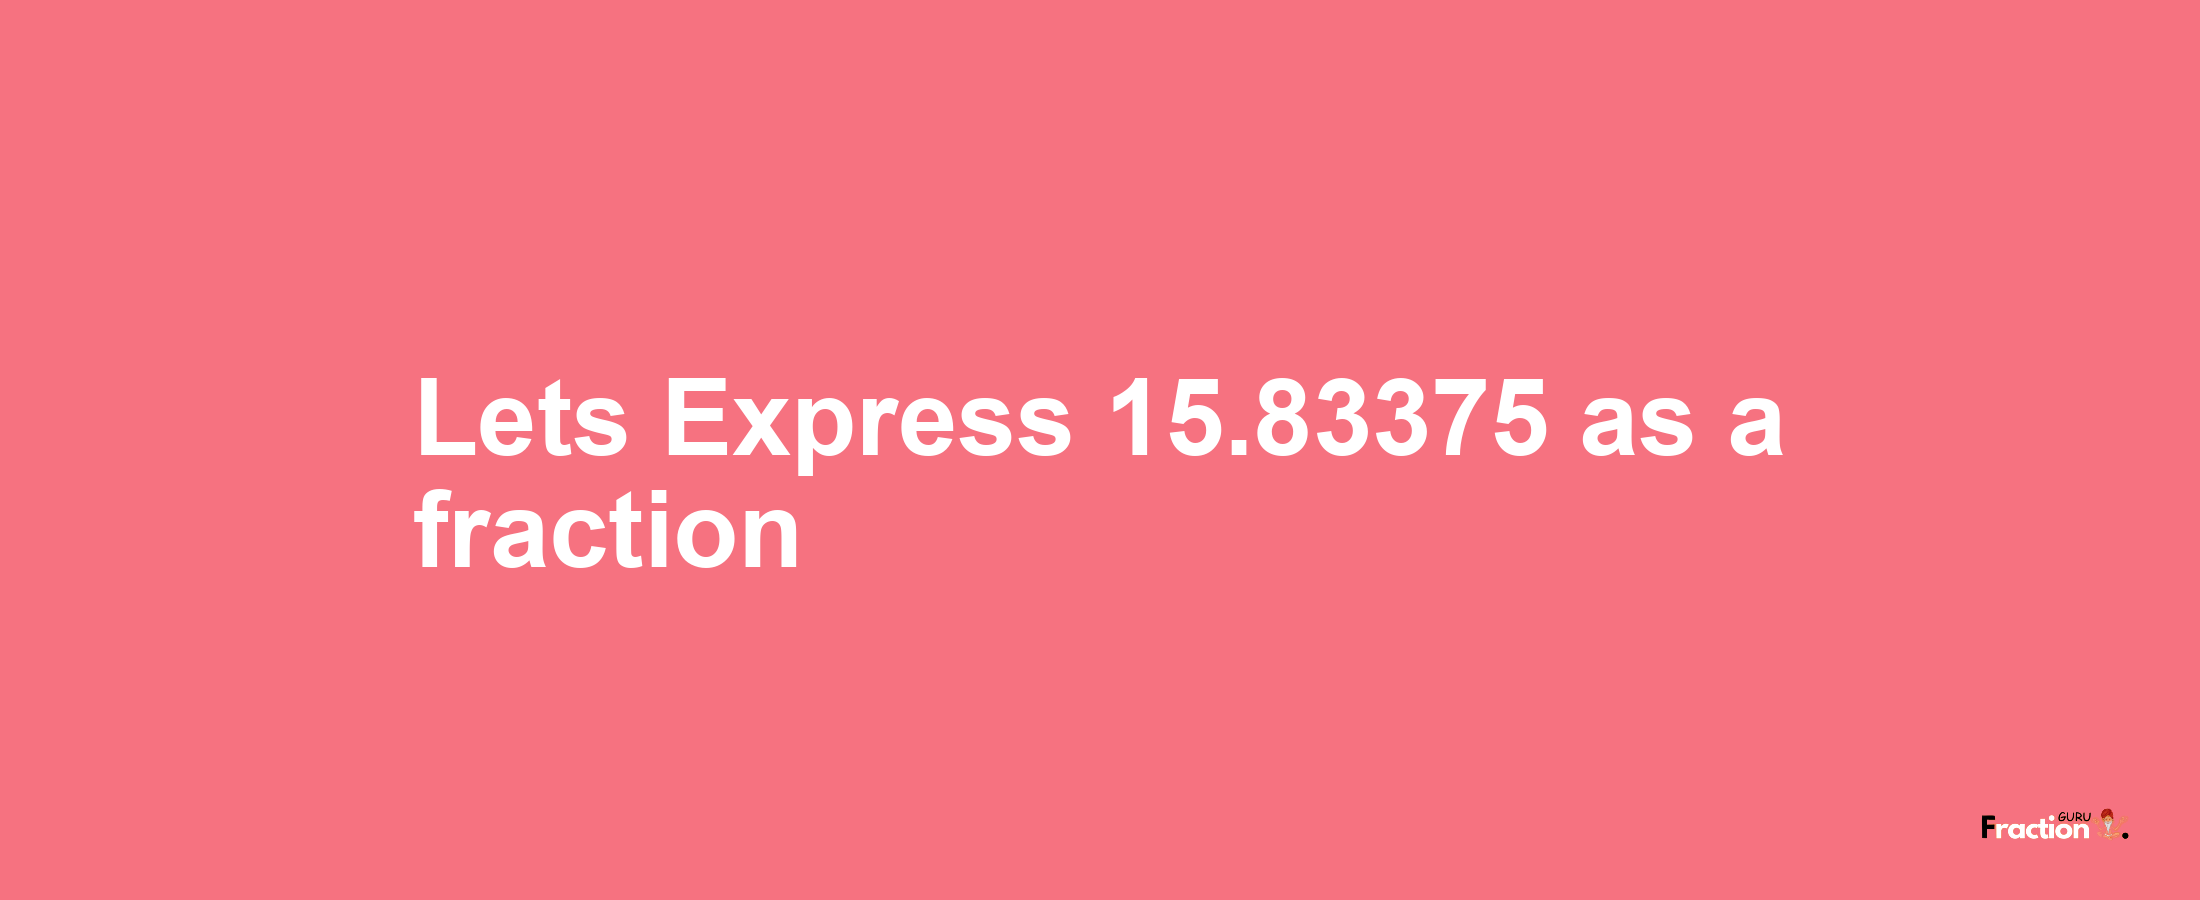 Lets Express 15.83375 as afraction